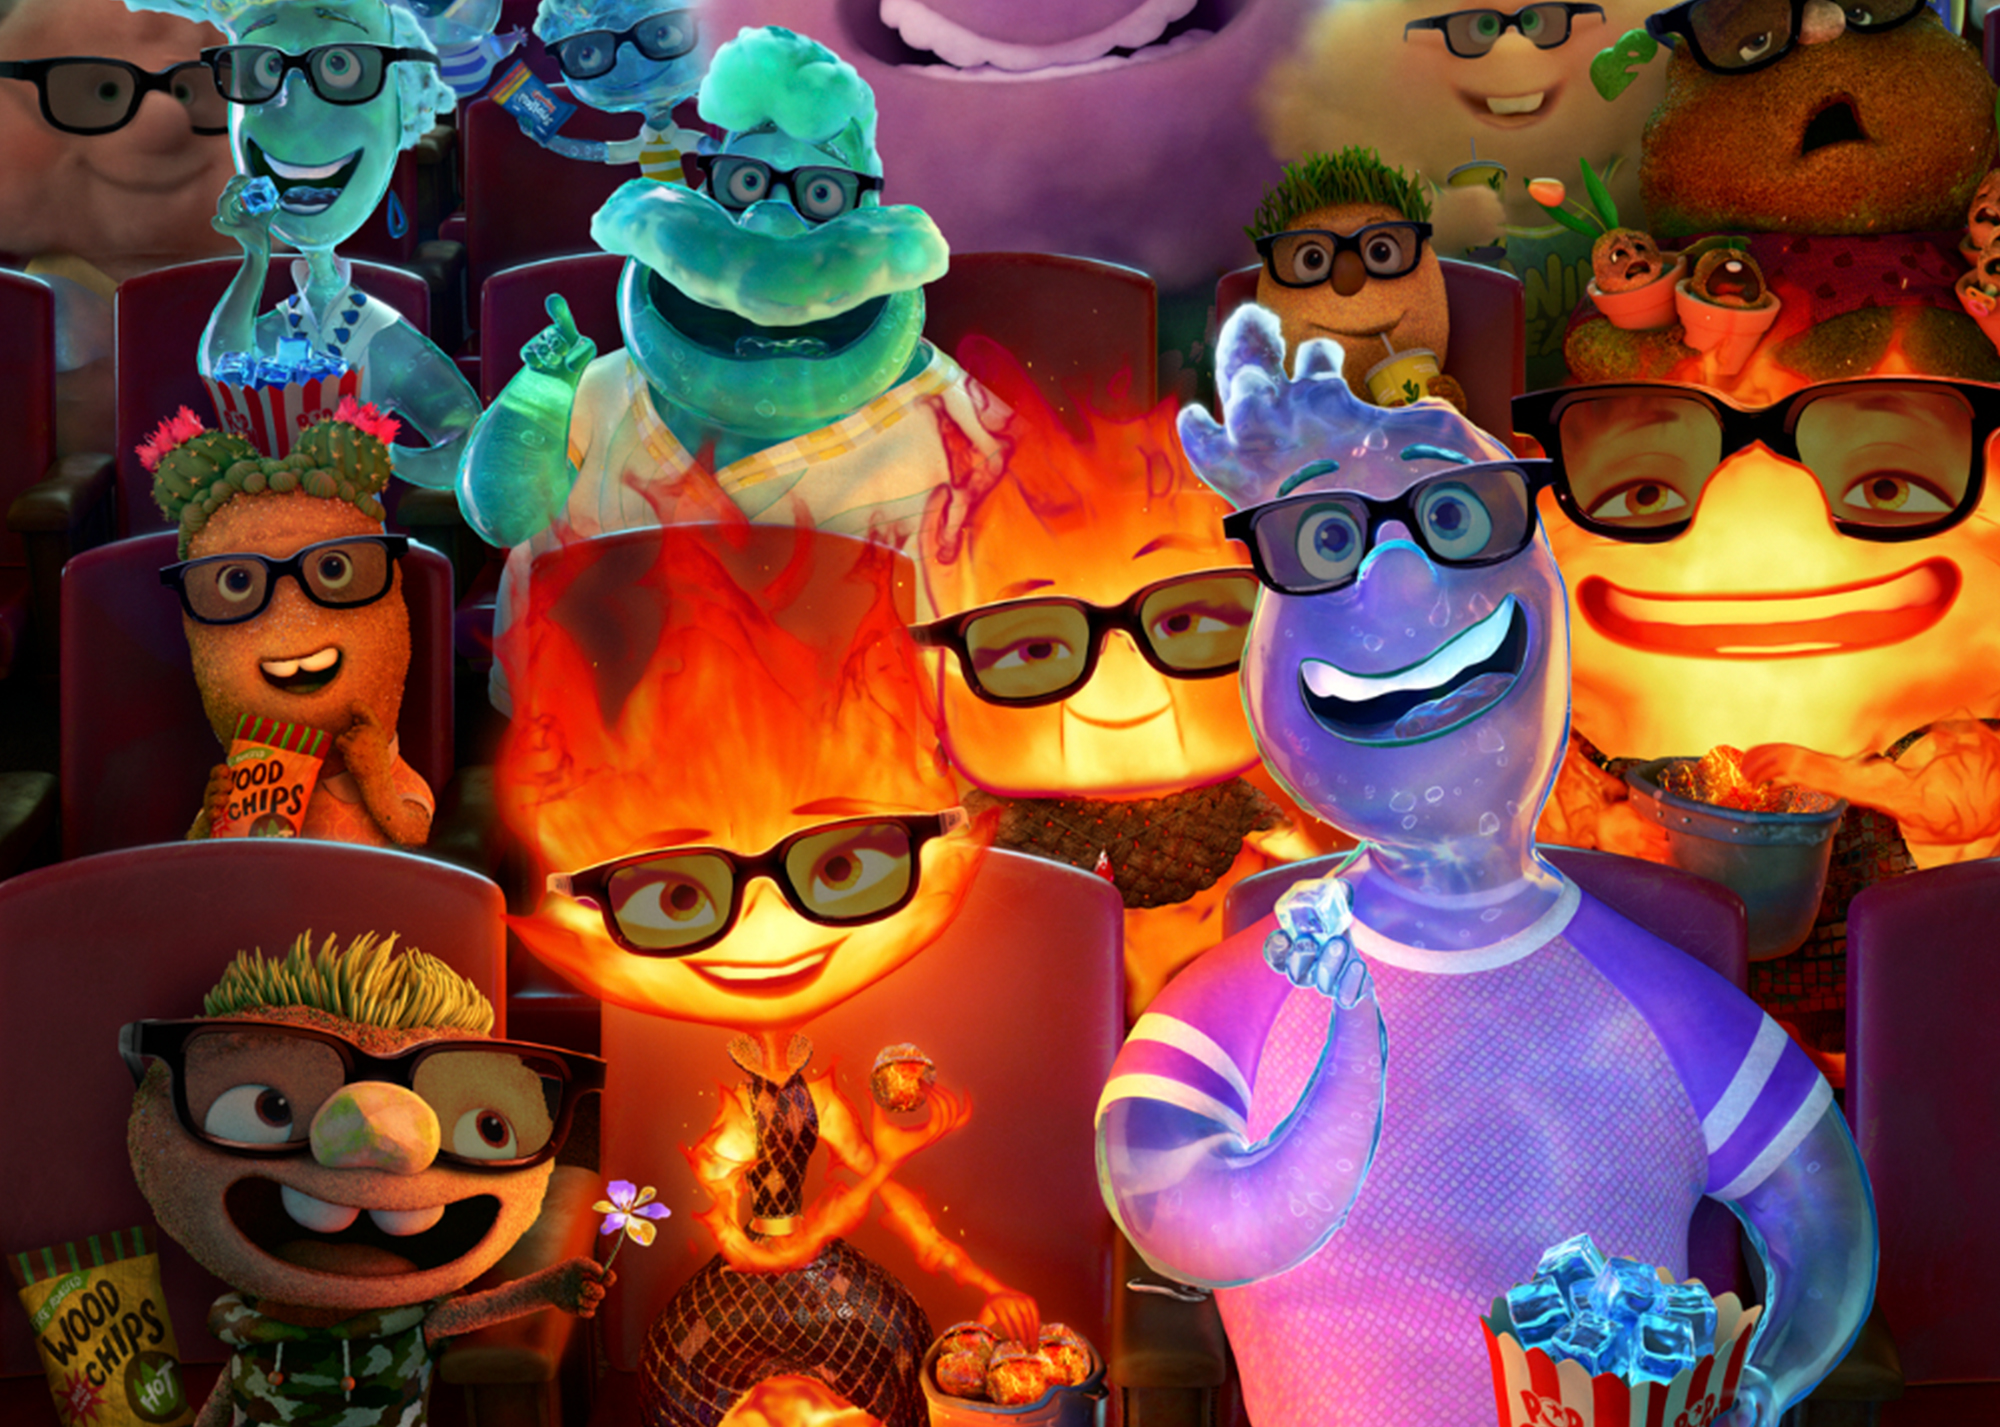 Meet the Characters of Disney and Pixar's Elemental - D23